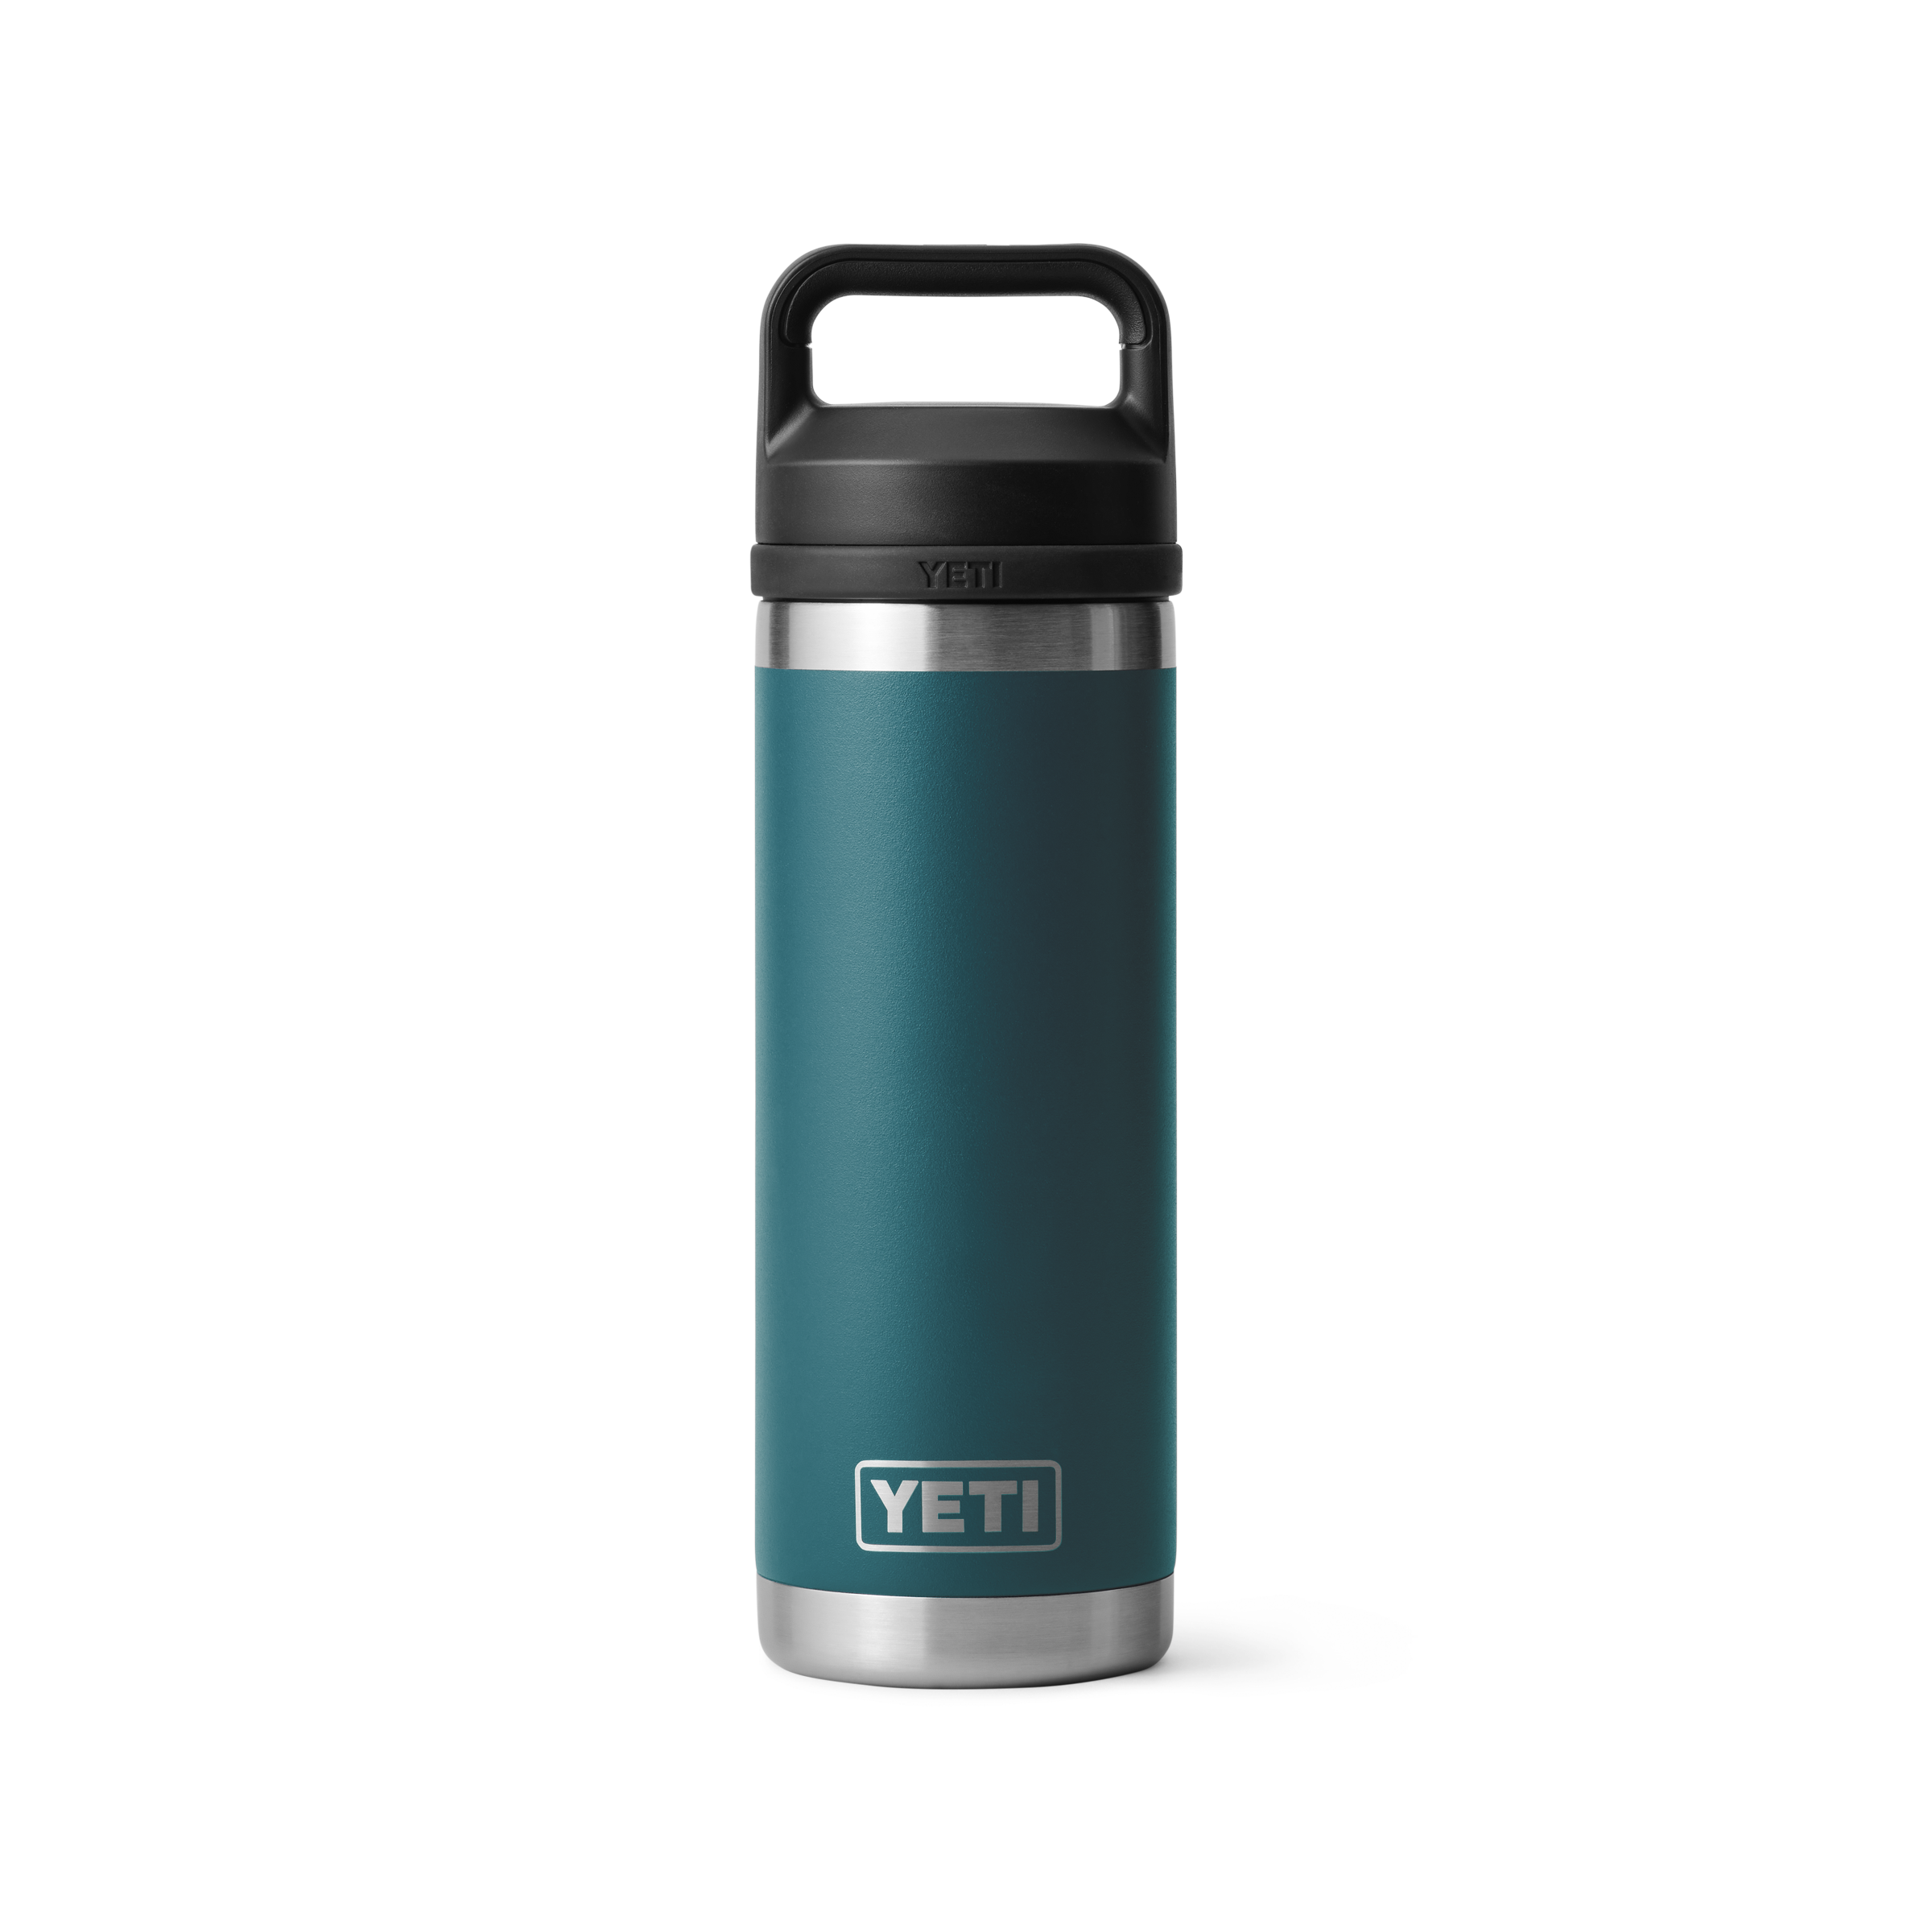 RAMBLER BOTTLE 18 OZ C (532ML) YETI AGAVE TEAL STAINLESS STEEL INSULATED BLUE DRINK BOTTLE DRINK WEAR CHUG CAP HANDLE SILVER YETI ENGRAVING HOT OR COLD